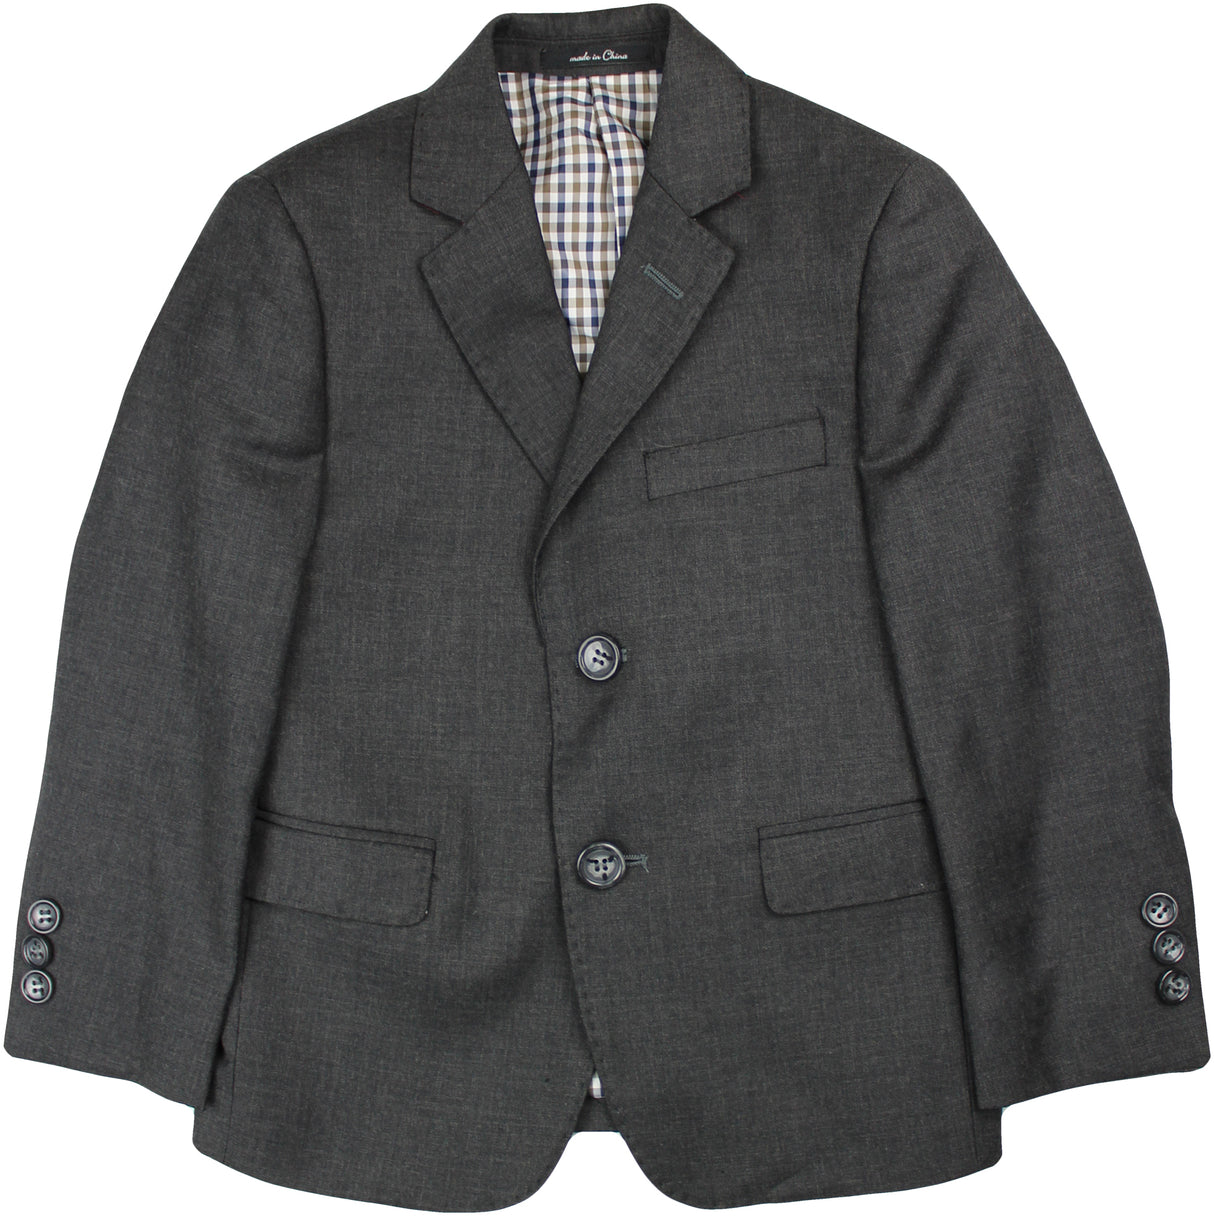 T.O. Collection Boys Charcoal Suit Separates - 1129-602